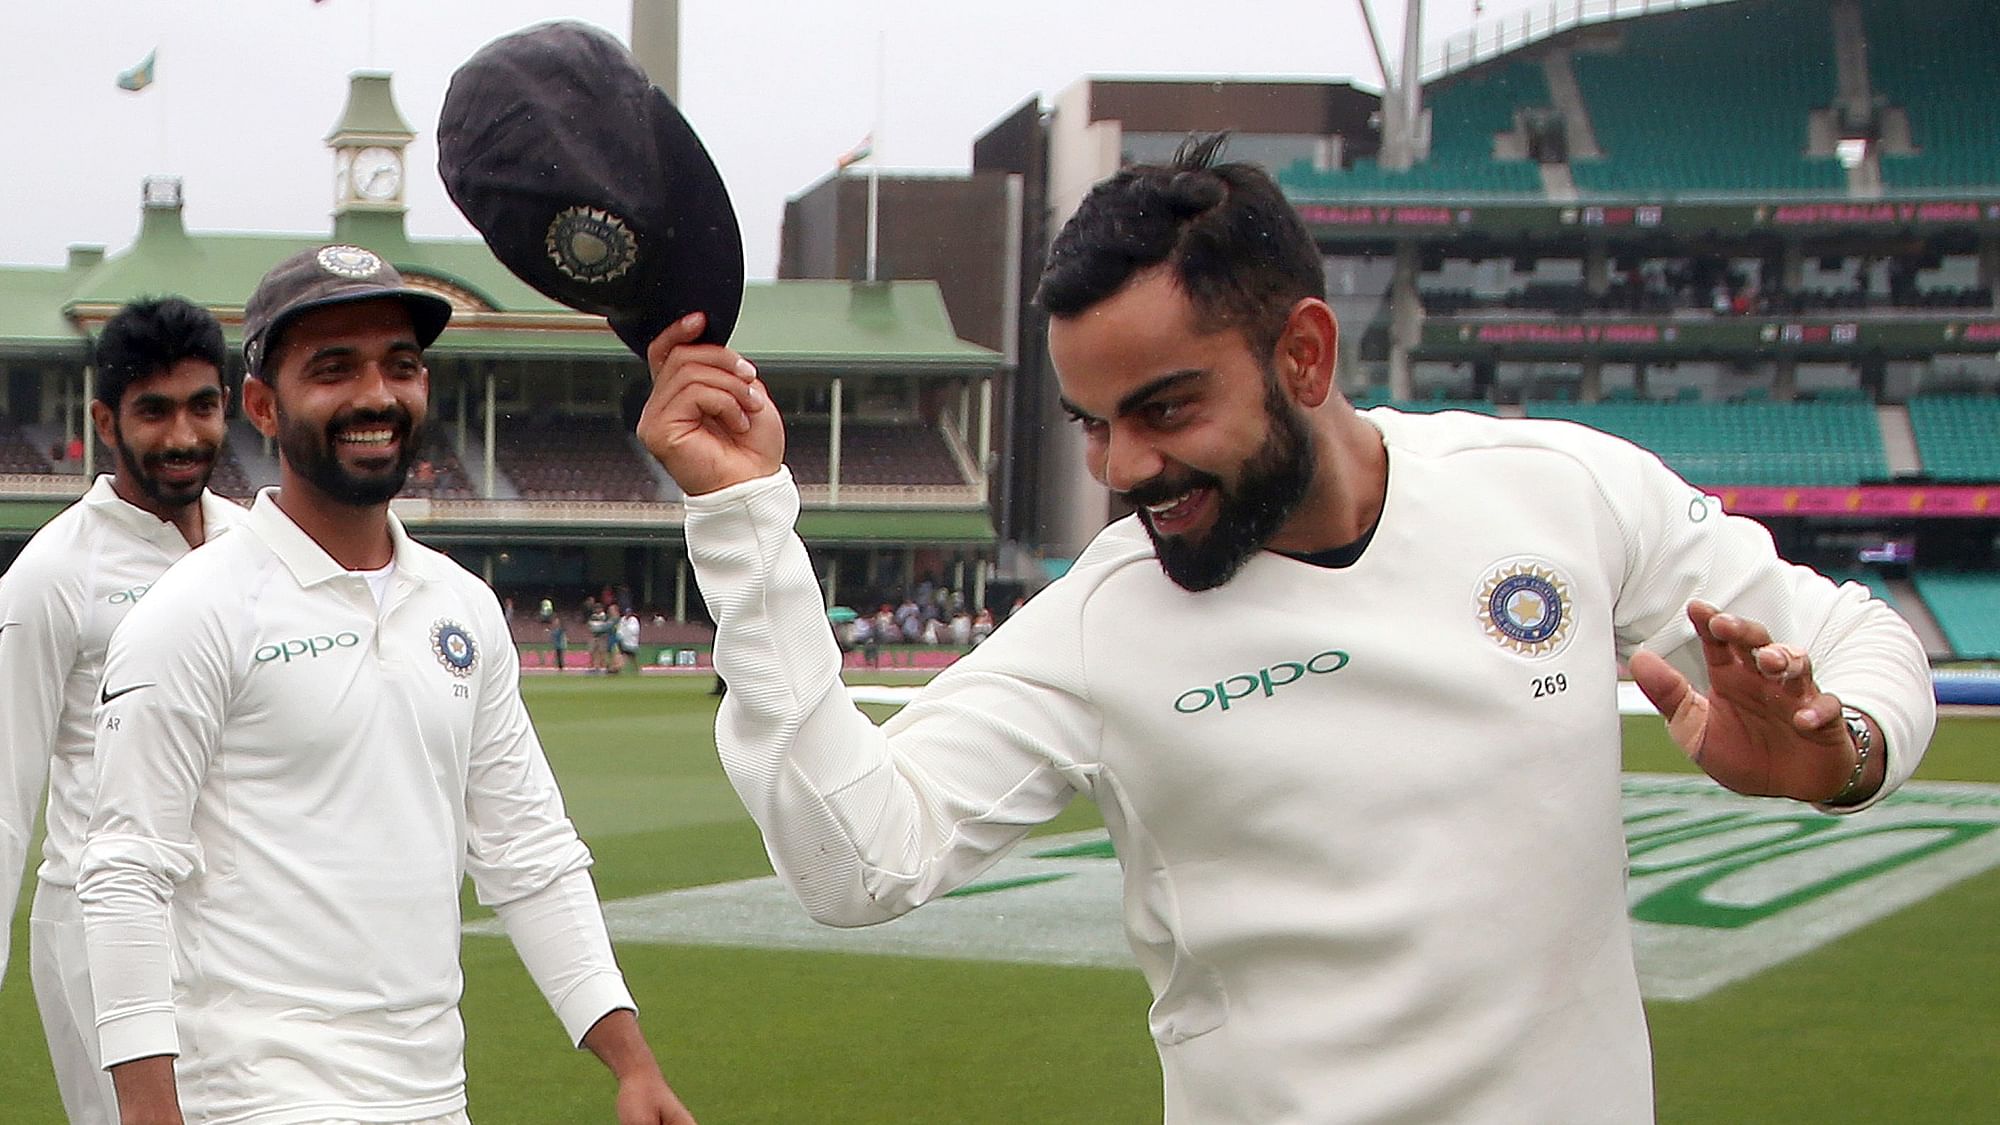 Indian captain Virat Kohli tips his hat as he celebrates with teammates after their historic Test series win in Australia.